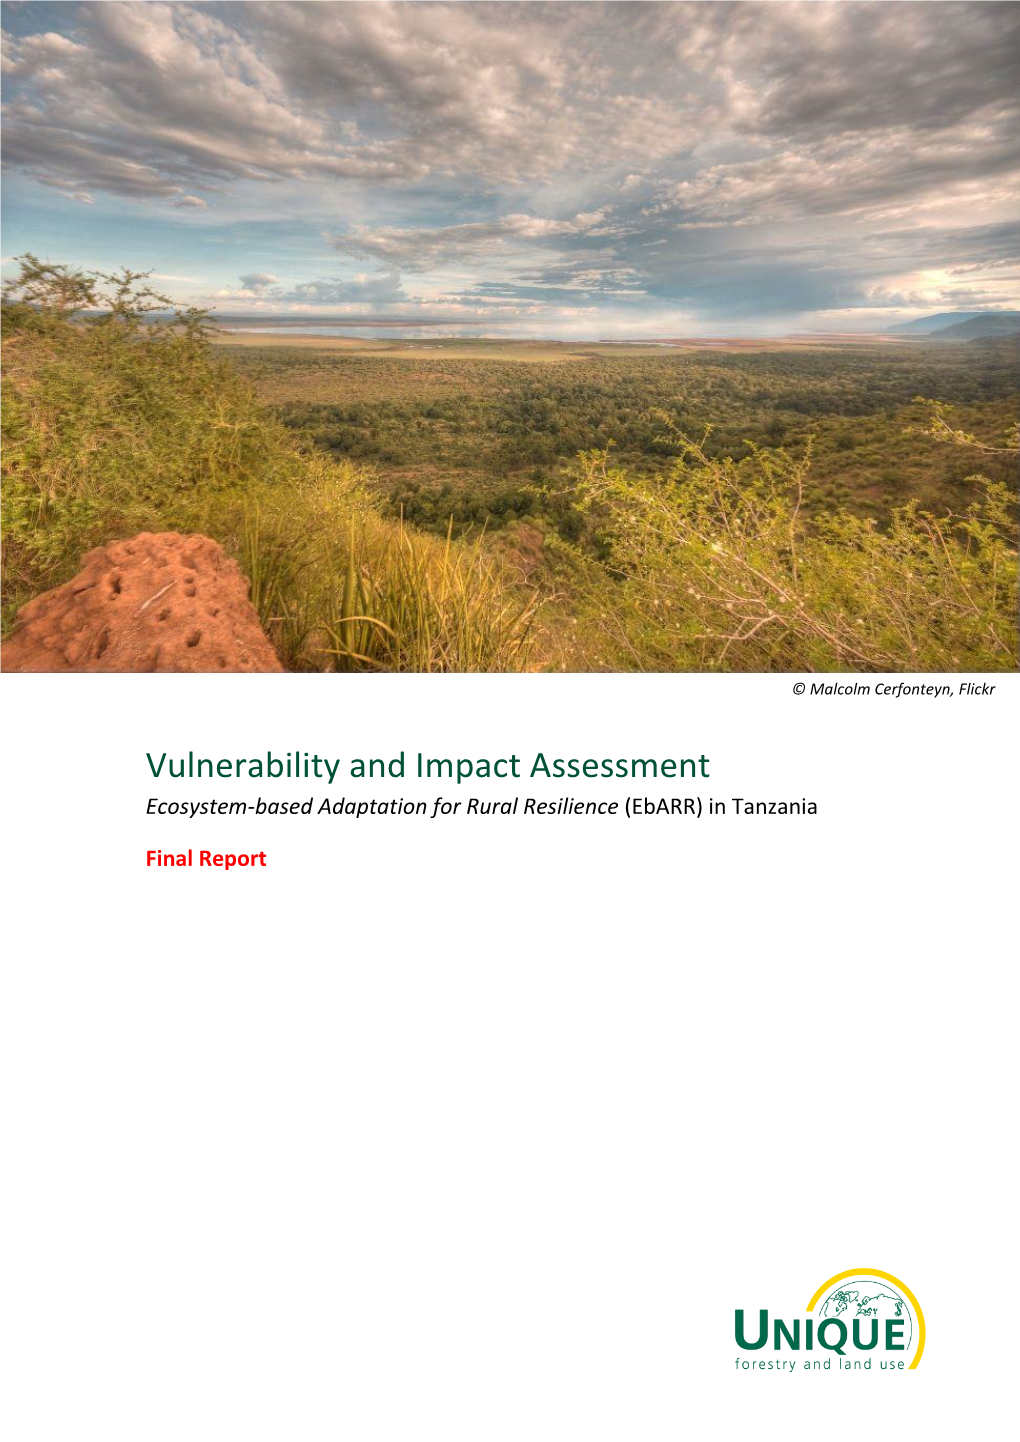 Vulnerability and Impact Assessment Ecosystem-Based Adaptation for Rural Resilience (Ebarr) in Tanzania